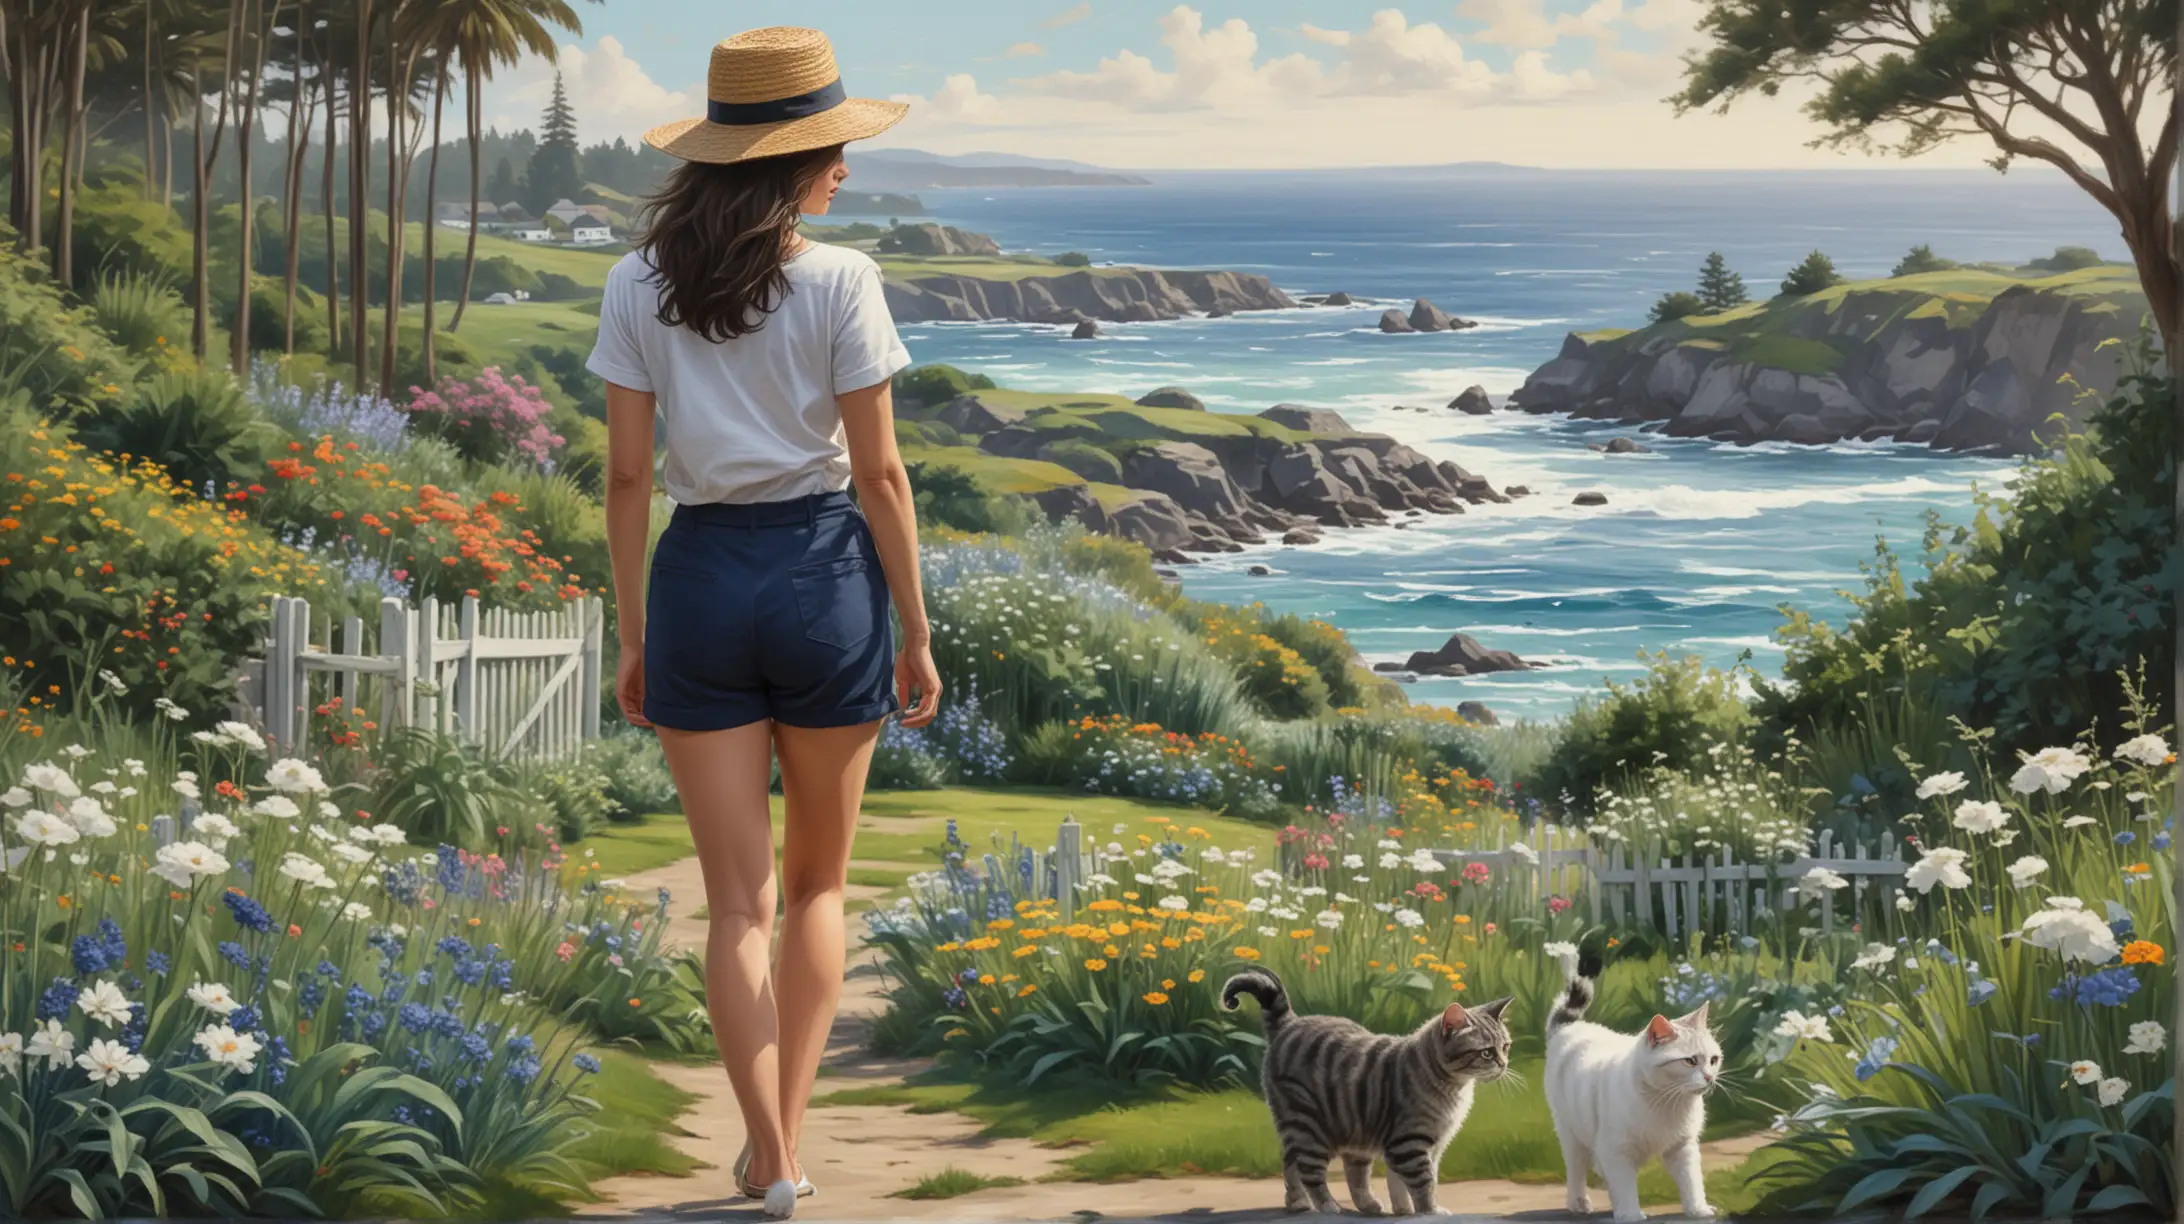 a mpressionist painting seen from a distance a woman with shoulder length dark hair dressed in  navy blue Bermuda shorts, white t shirt, straw hat, seen from a distance walking through a garden, two gray tabby cats accompany her, depth of field to a glimpse of ocean with Pacific Northwest shore line